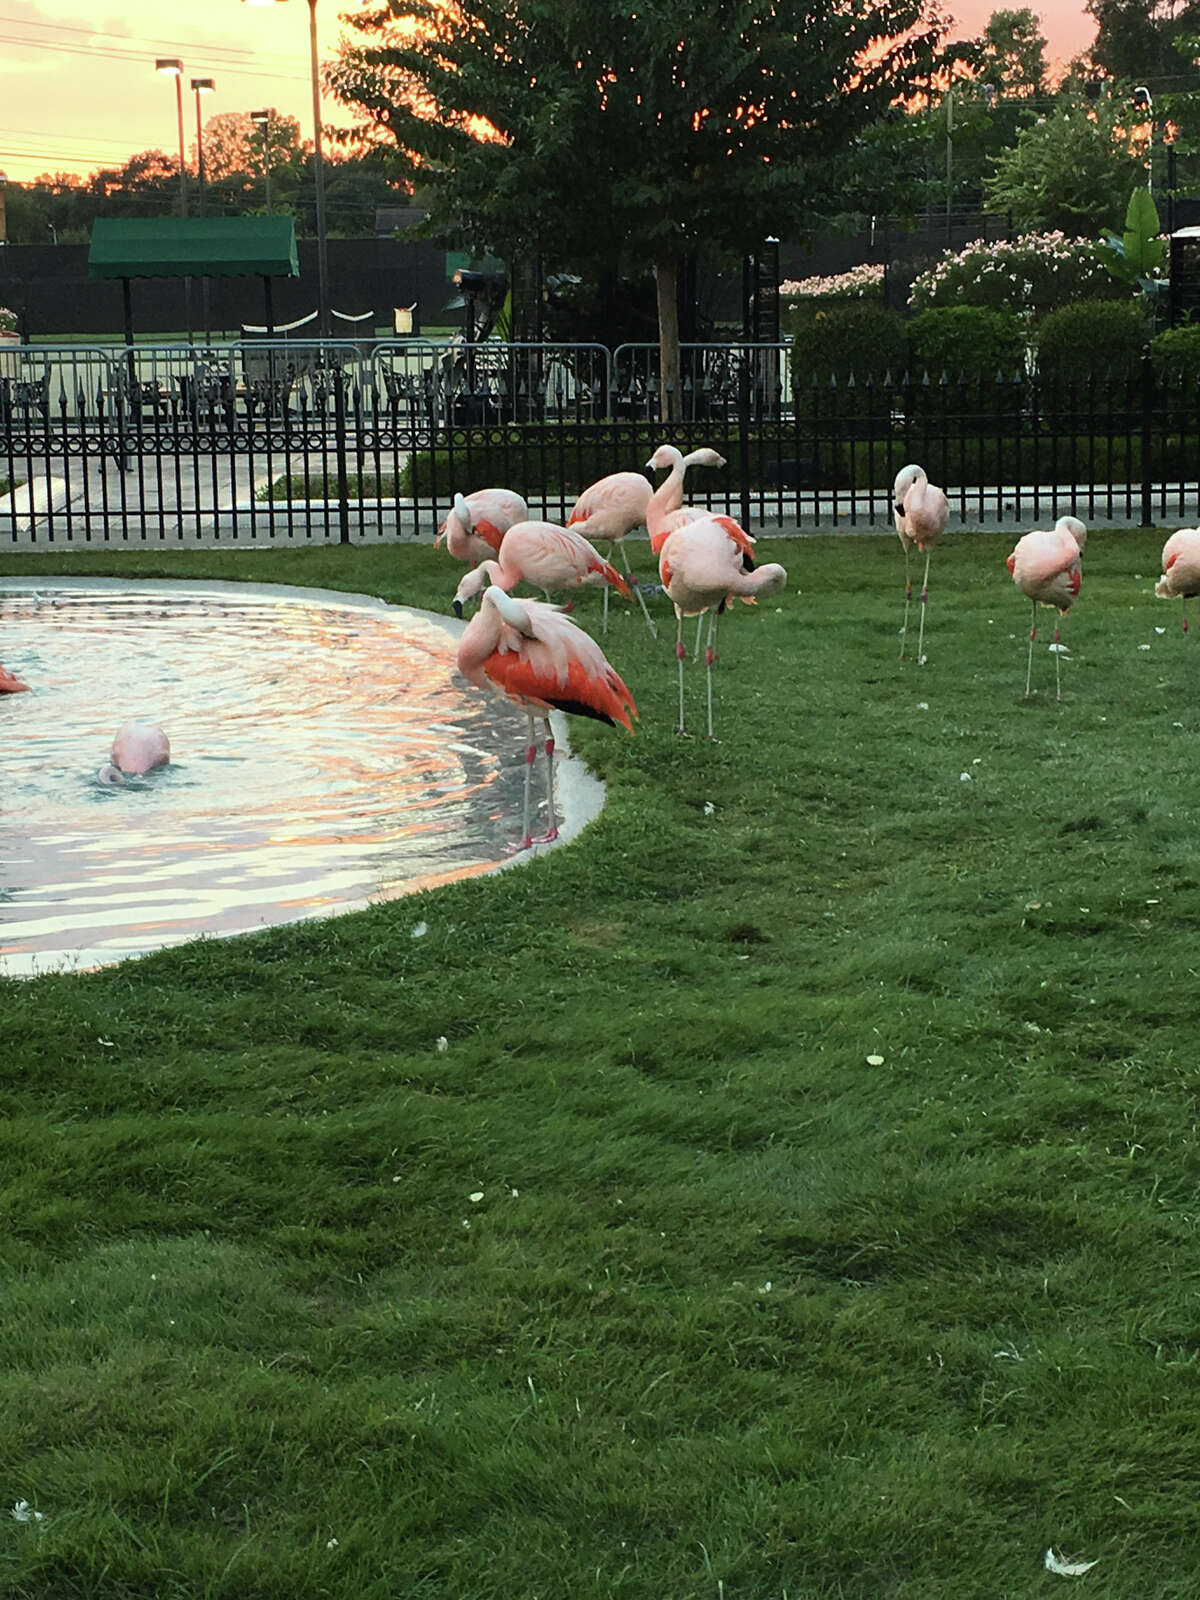 The flamingos at the Westside Tennis Court have been living there for a little over a month.  